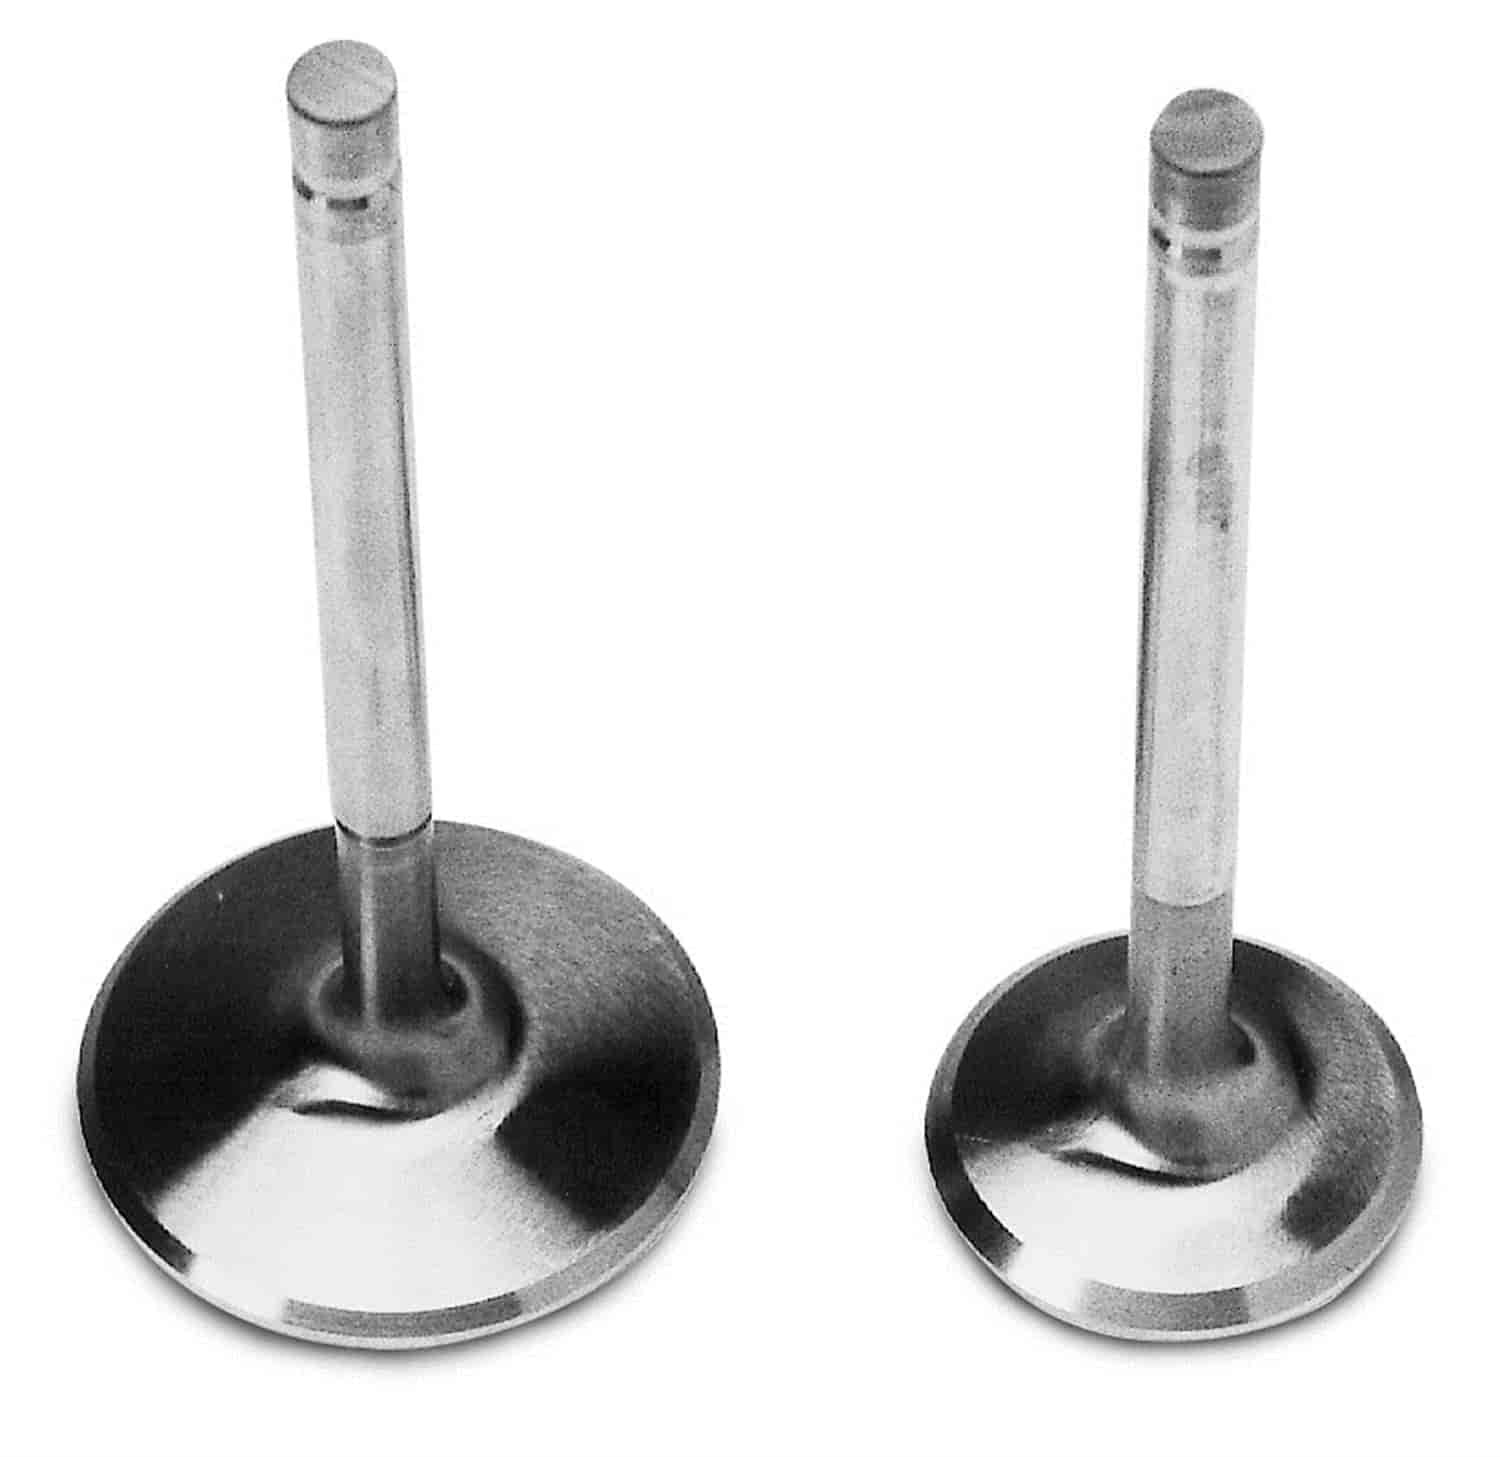 Single Exhaust Valve 1.90" for Big Block Chevy Victor 24 Degree Heads #350-77409